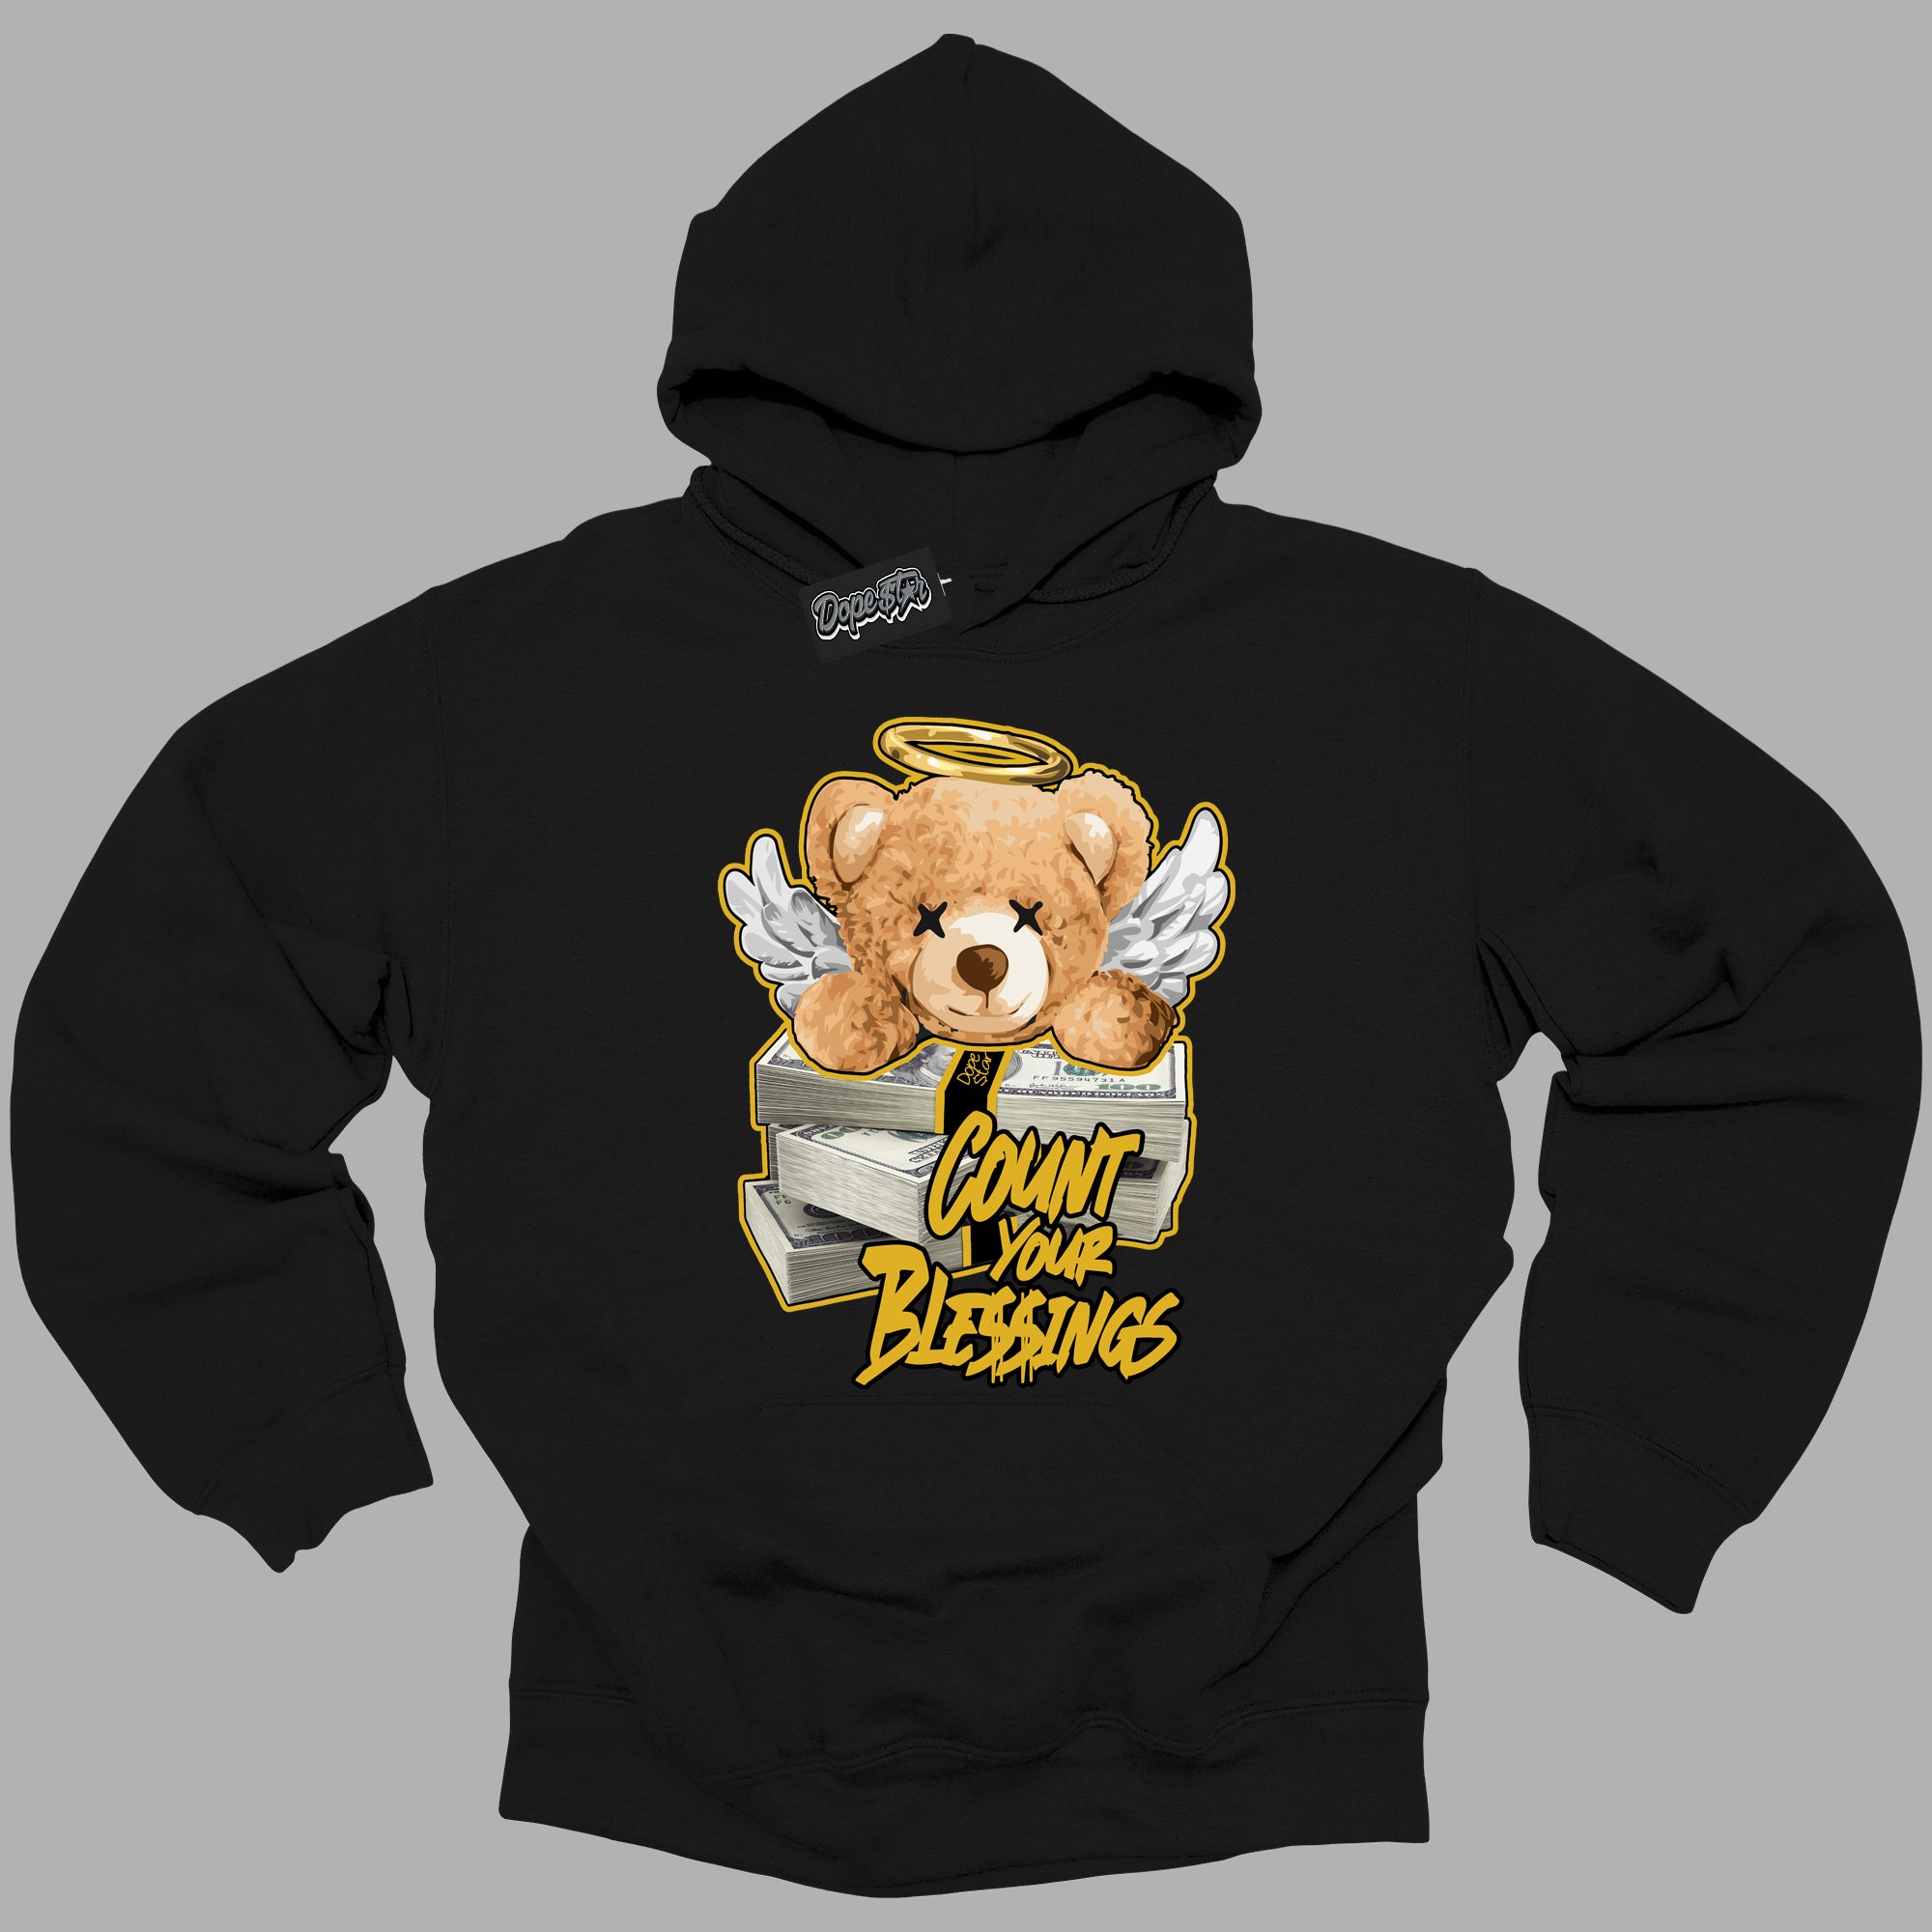 Cool Black Hoodie with “ Count Your Blessings ”  design that Perfectly Matches Yellow Ochre 6s Sneakers.c